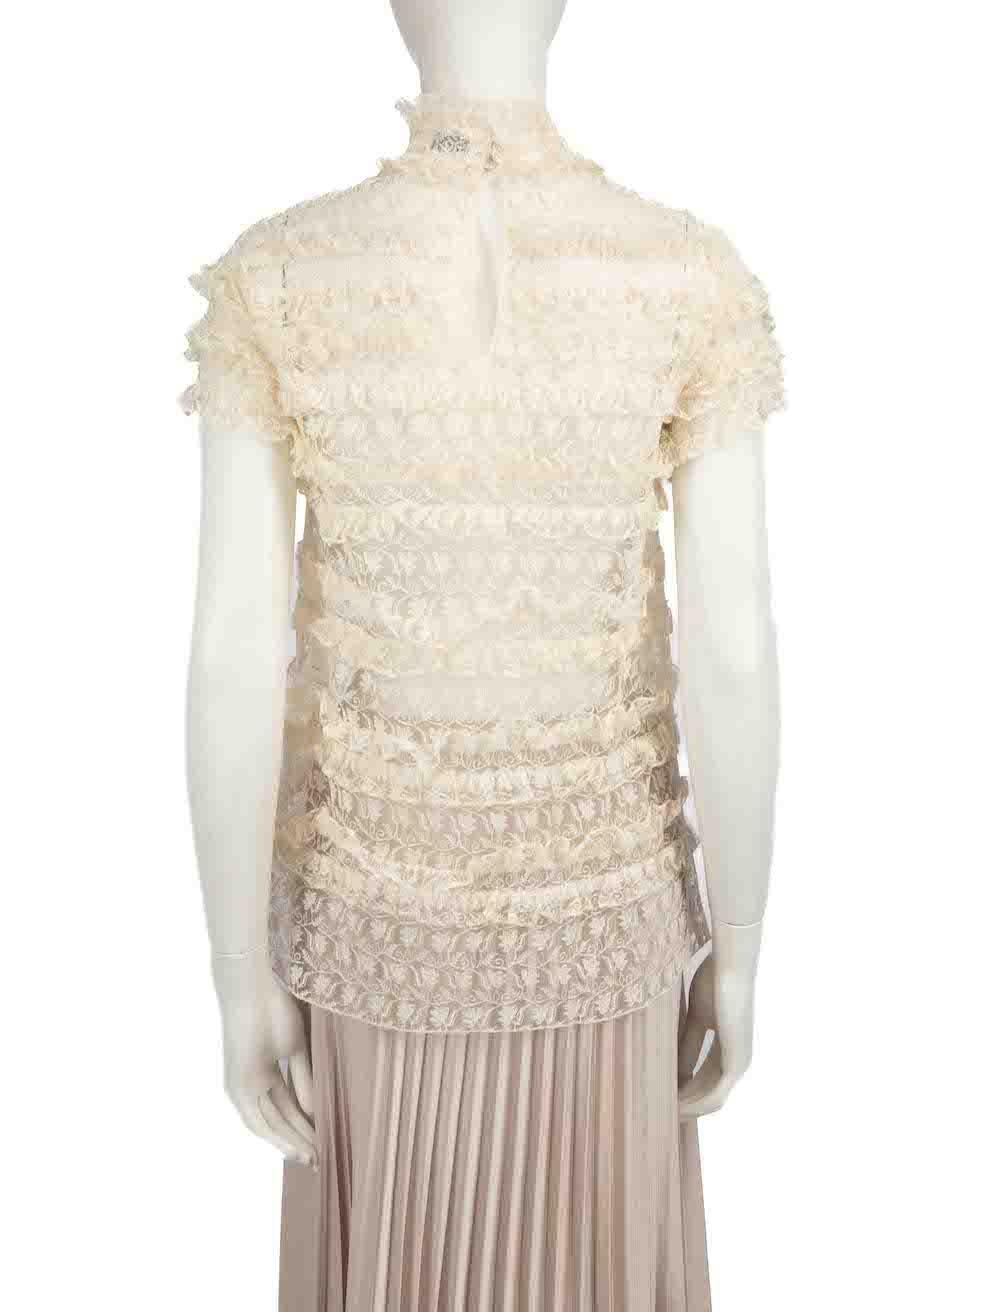 Saint Laurent Ecru Lace Ruffled Top Size S In Excellent Condition For Sale In London, GB